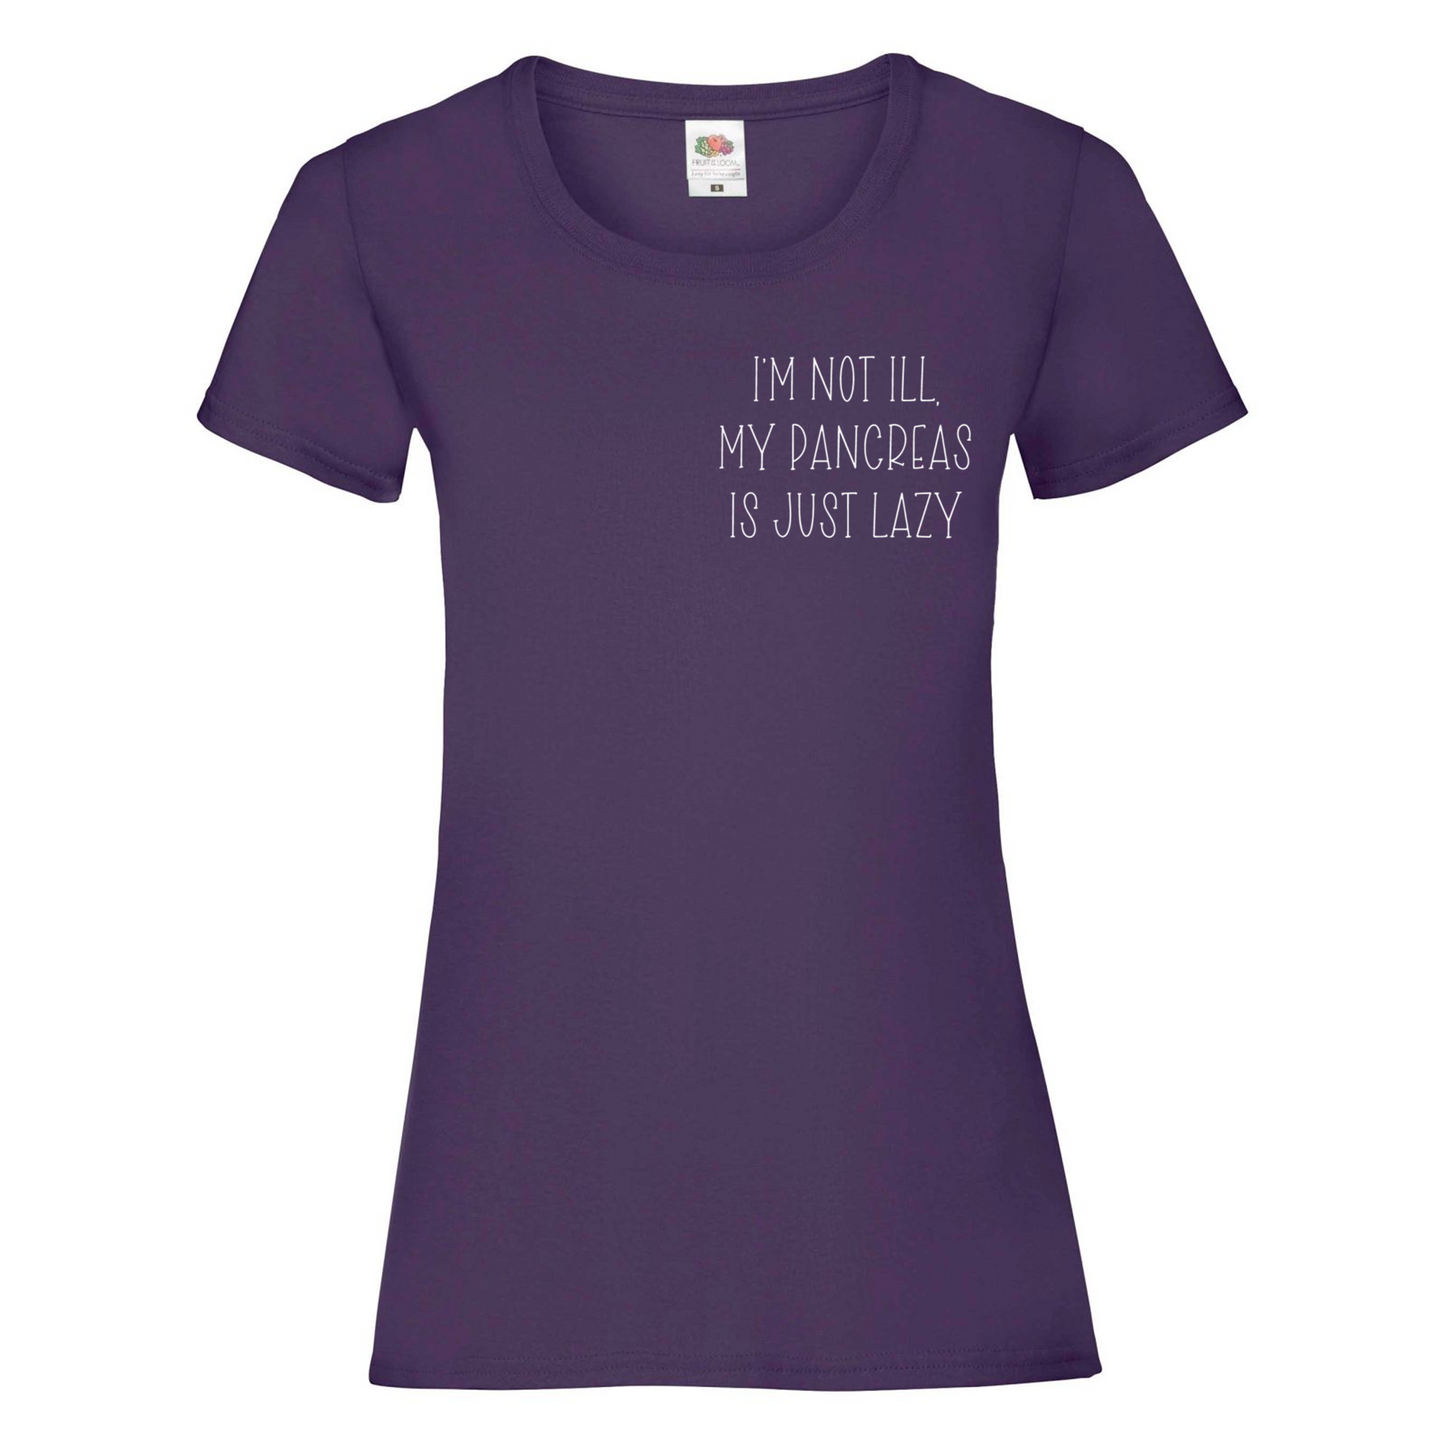 I'm Not Ill, My Pancreas Is Just Lazy Women's T Shirt